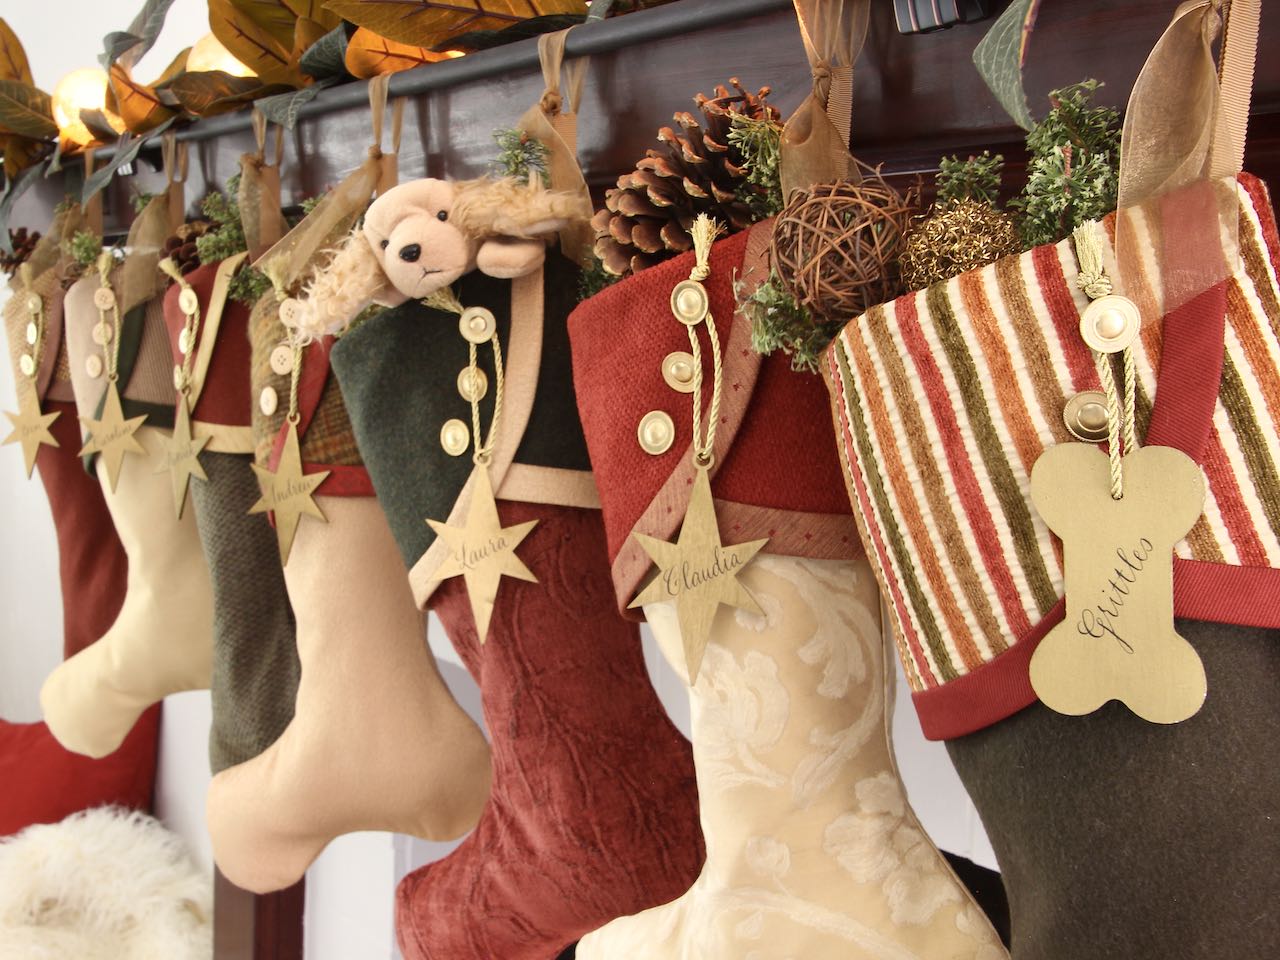 7 coordinating yet unique Christmas stockings are hanging from a mantel. Gold wooden star name tags hang from the top of three buttons on each cuff